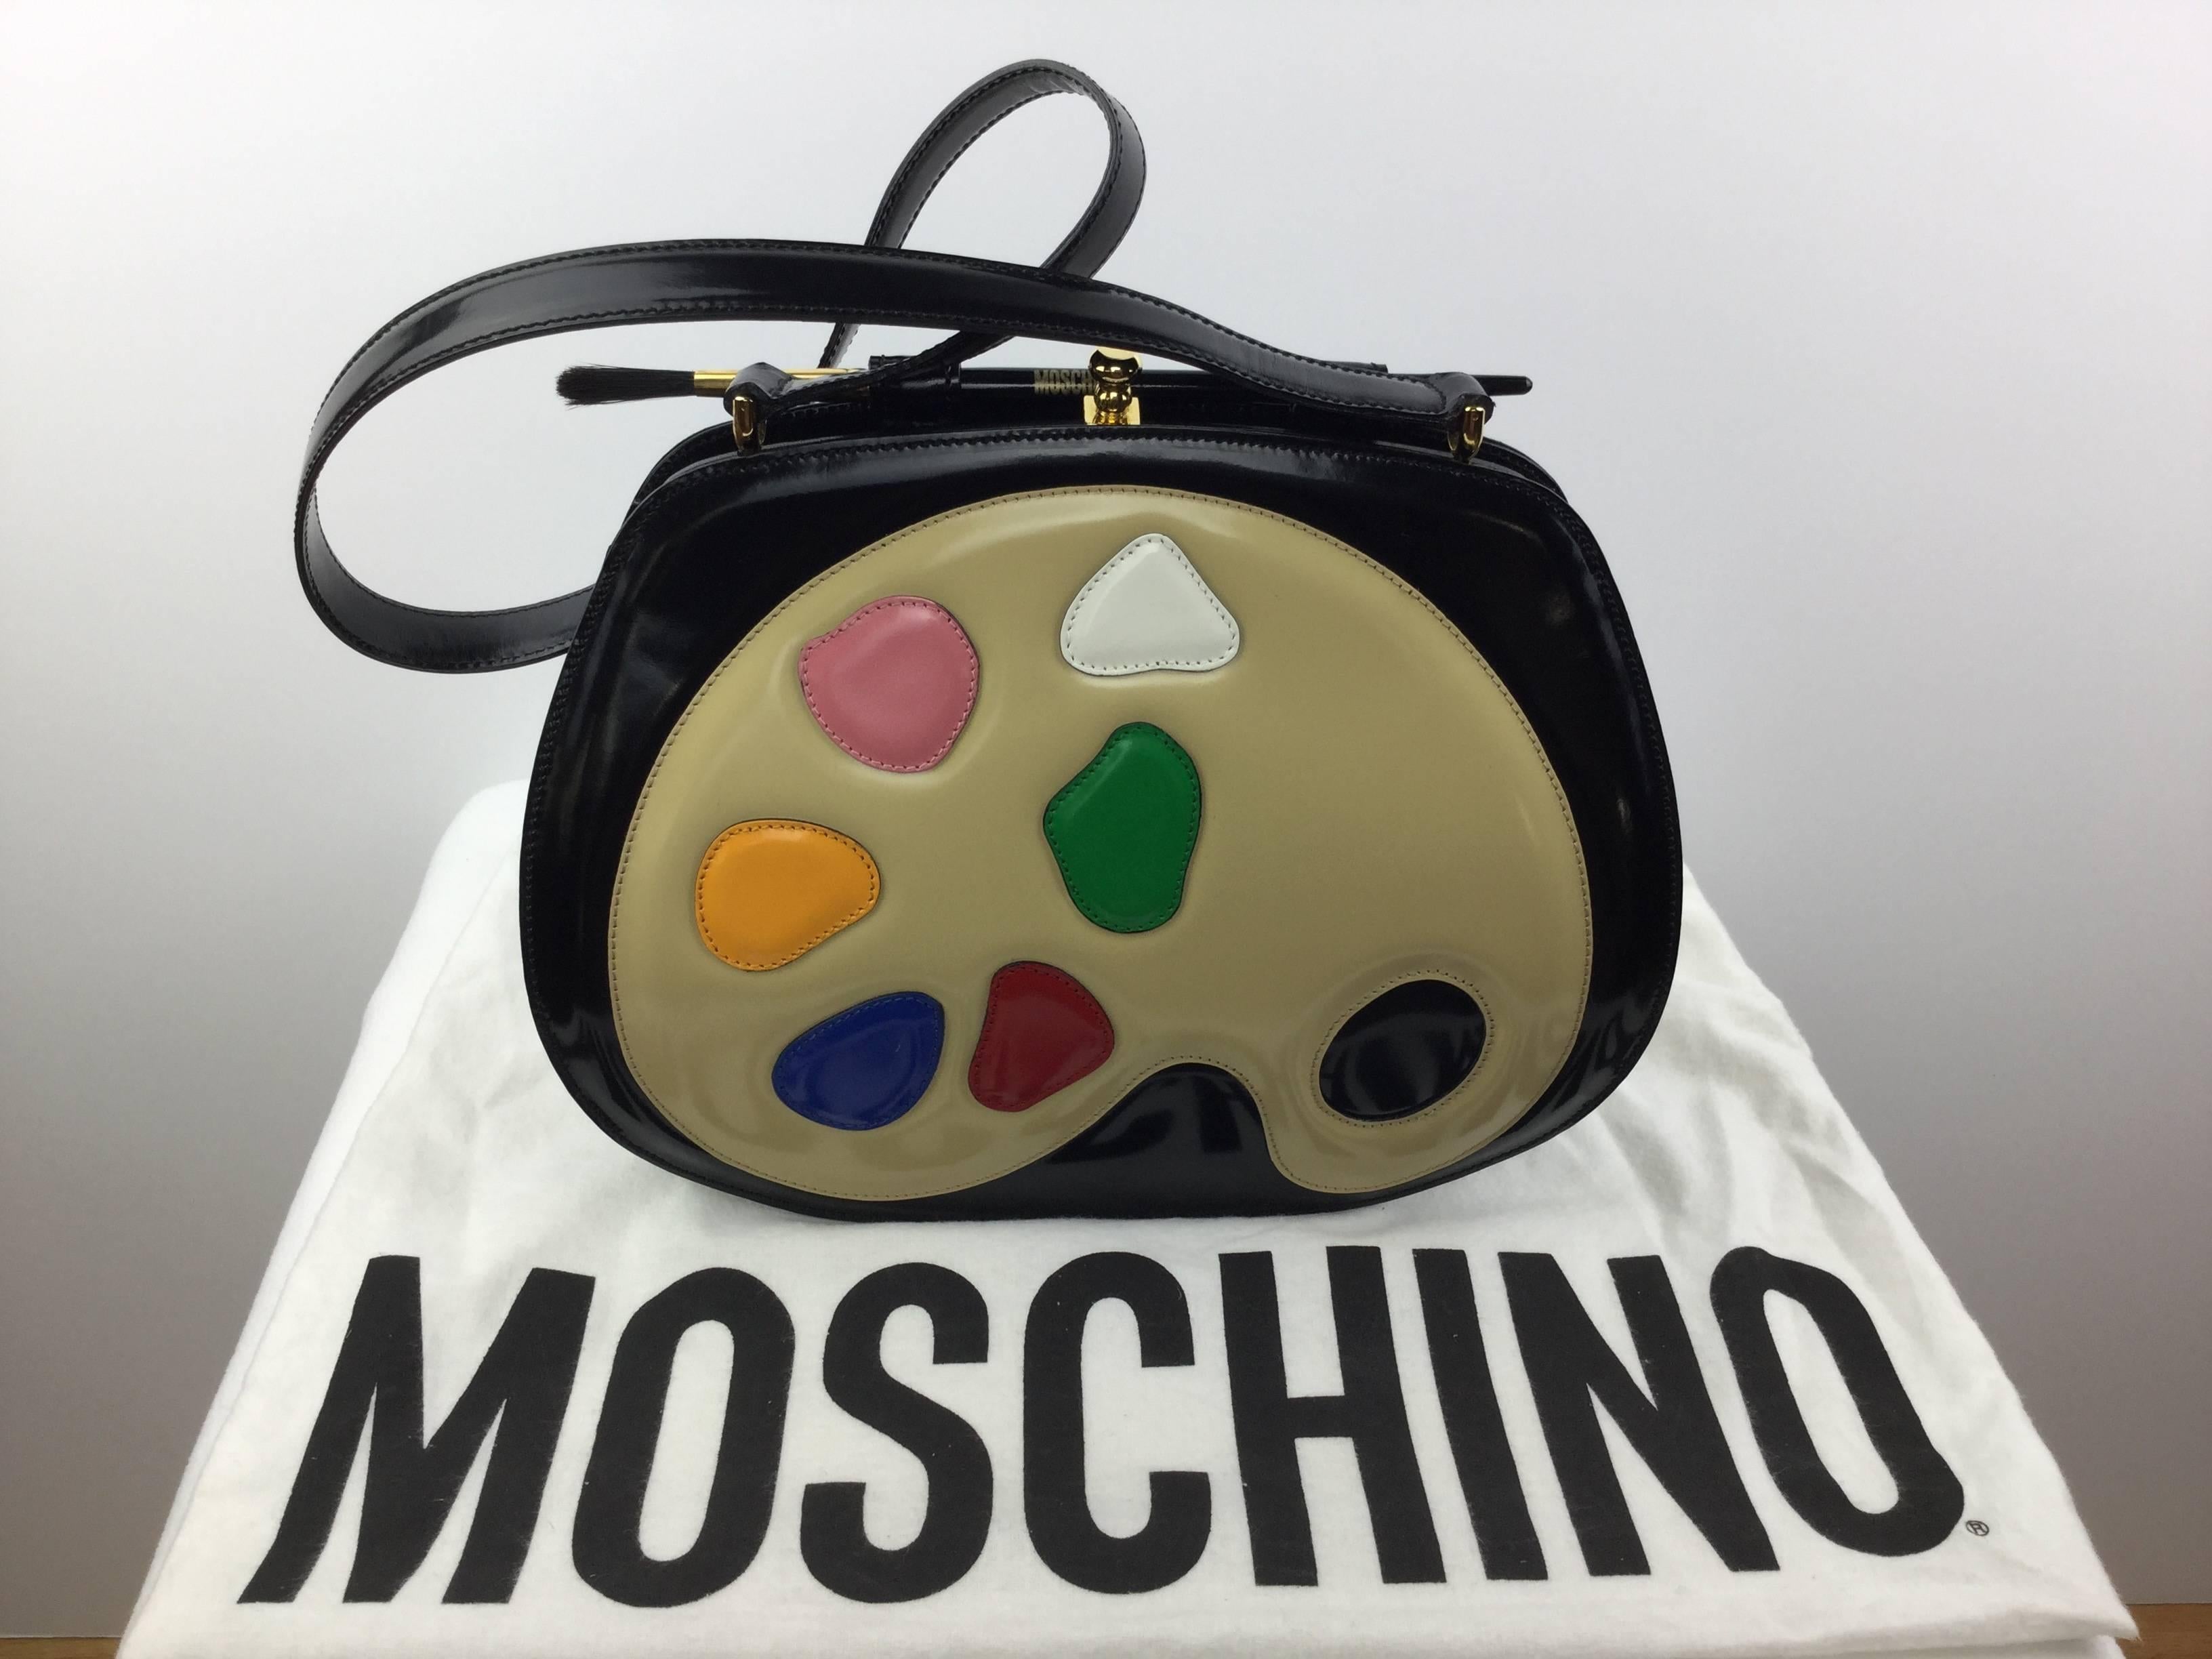 
Fabulous Moschino bag made in Italy by Redwall. 

Super rare!  Iconic.

Designed as an artists palette complete with a real paintbrush
adorning the top.

Made of shiny patent leather.

Interior lined with jacquard fabric with one zipper